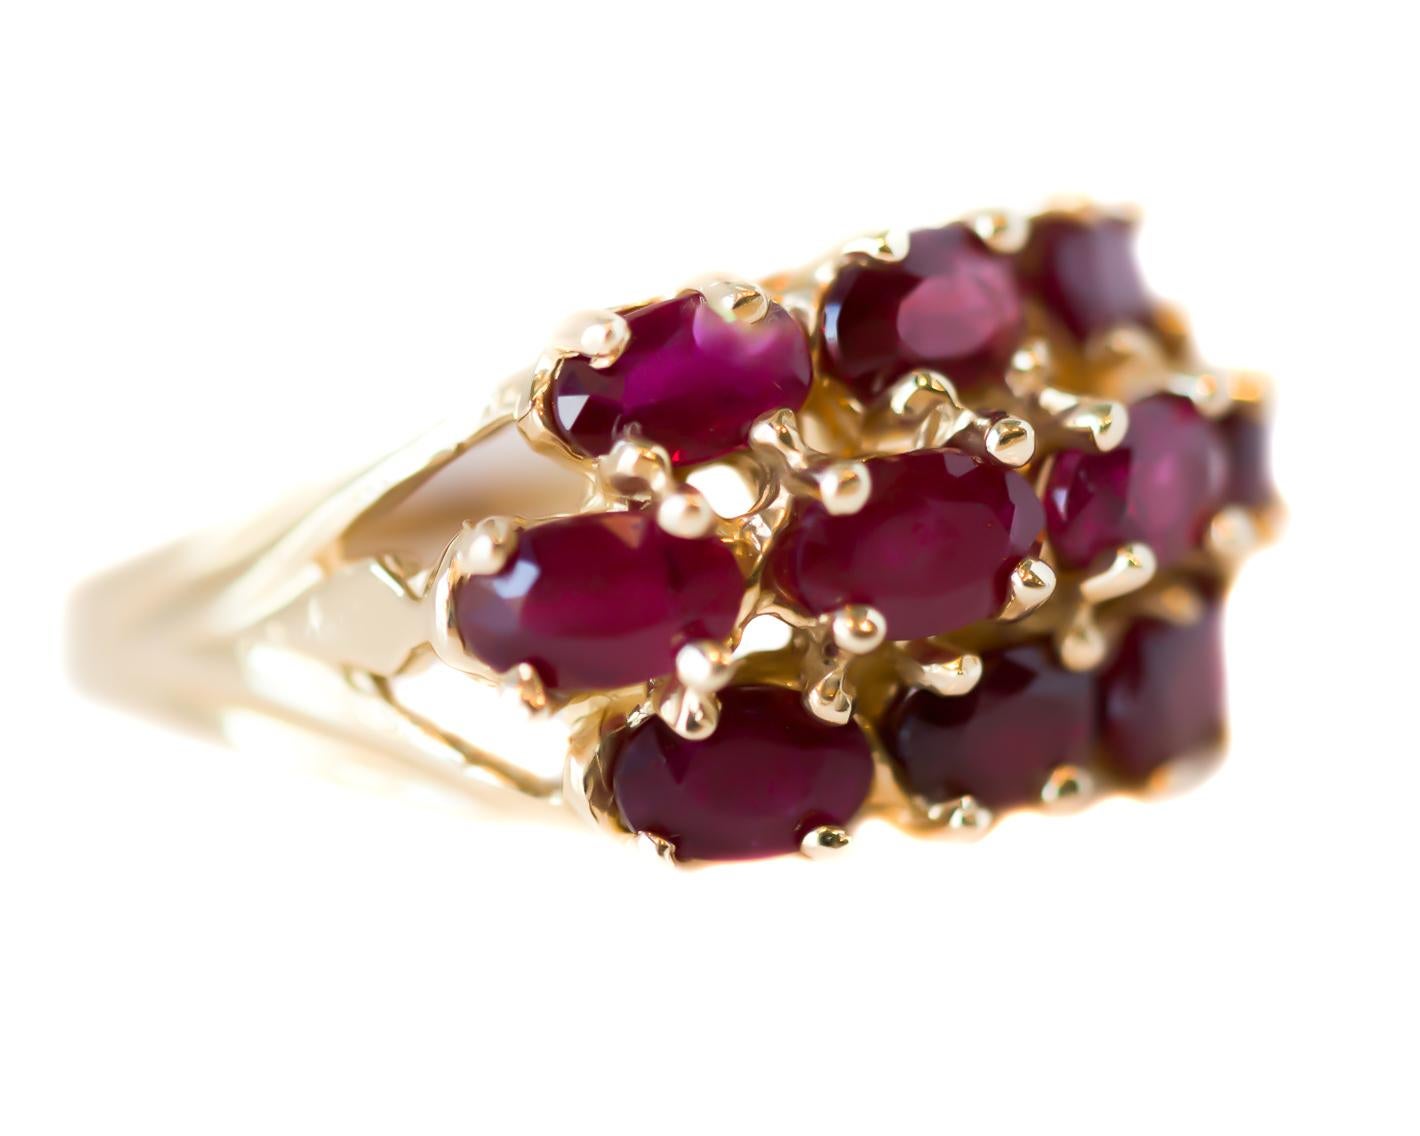 1950s Retro Ruby Cluster Cocktail Ring - 14 Karat Yellow Gold, Rubies

Features:
3.0 carats total Oval cut Rubies (Quantity 10)
Pinkish Red Rubies
14 Karat Yellow Gold 
Prong Set Stones

Finger to top of stone measures 8 millimeters
Ring width